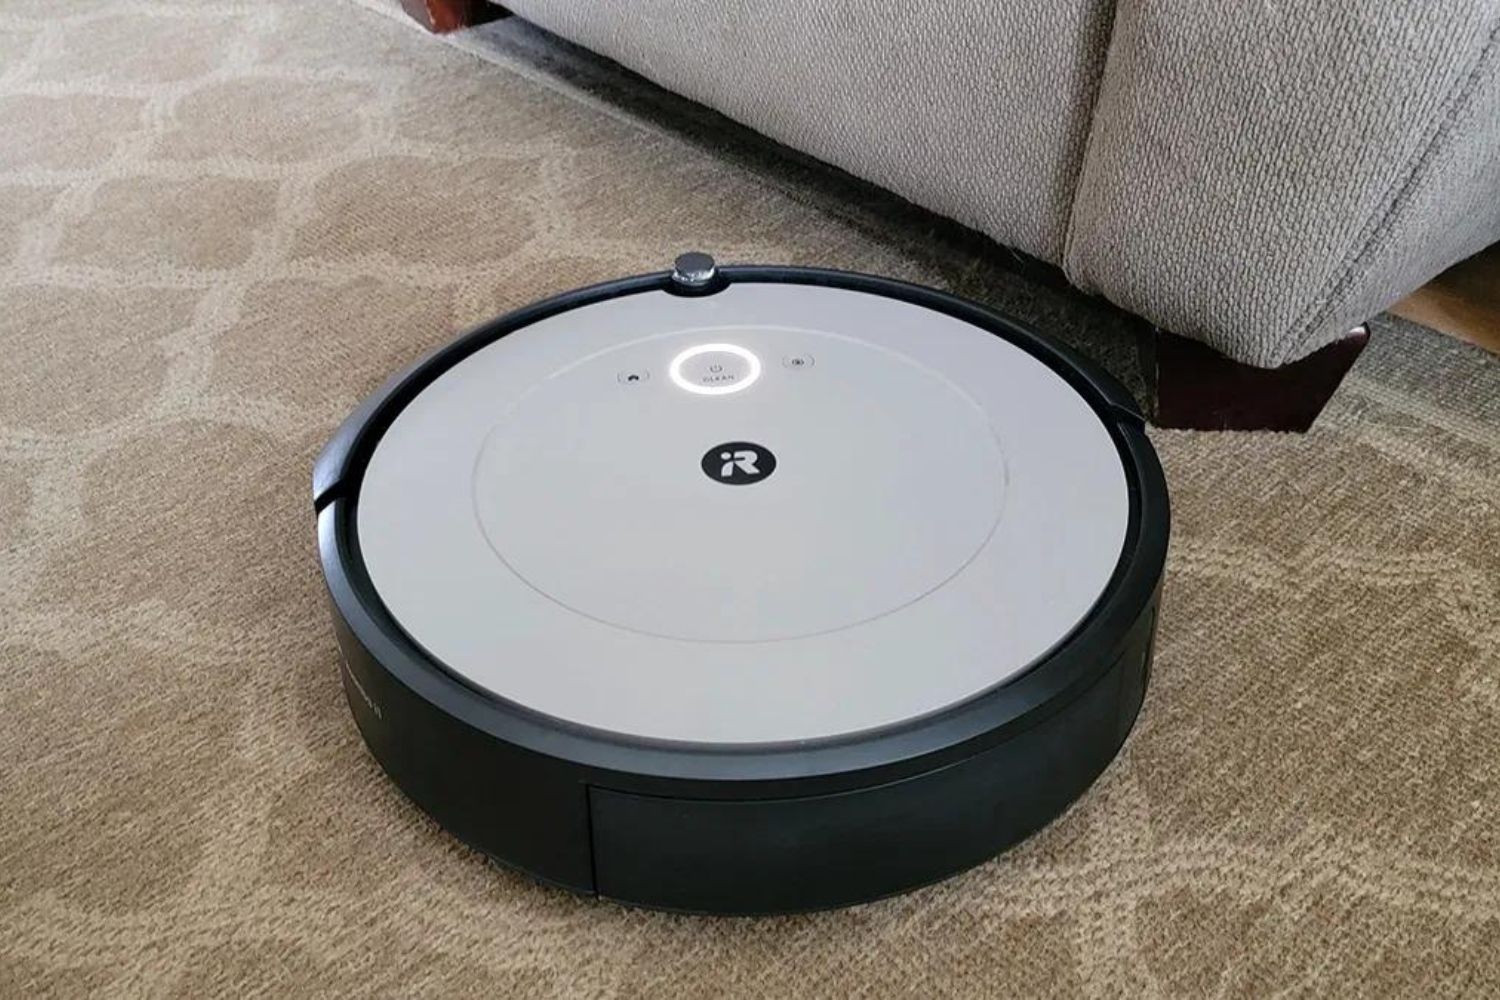 How To Reset Robot Vacuum Cleaner